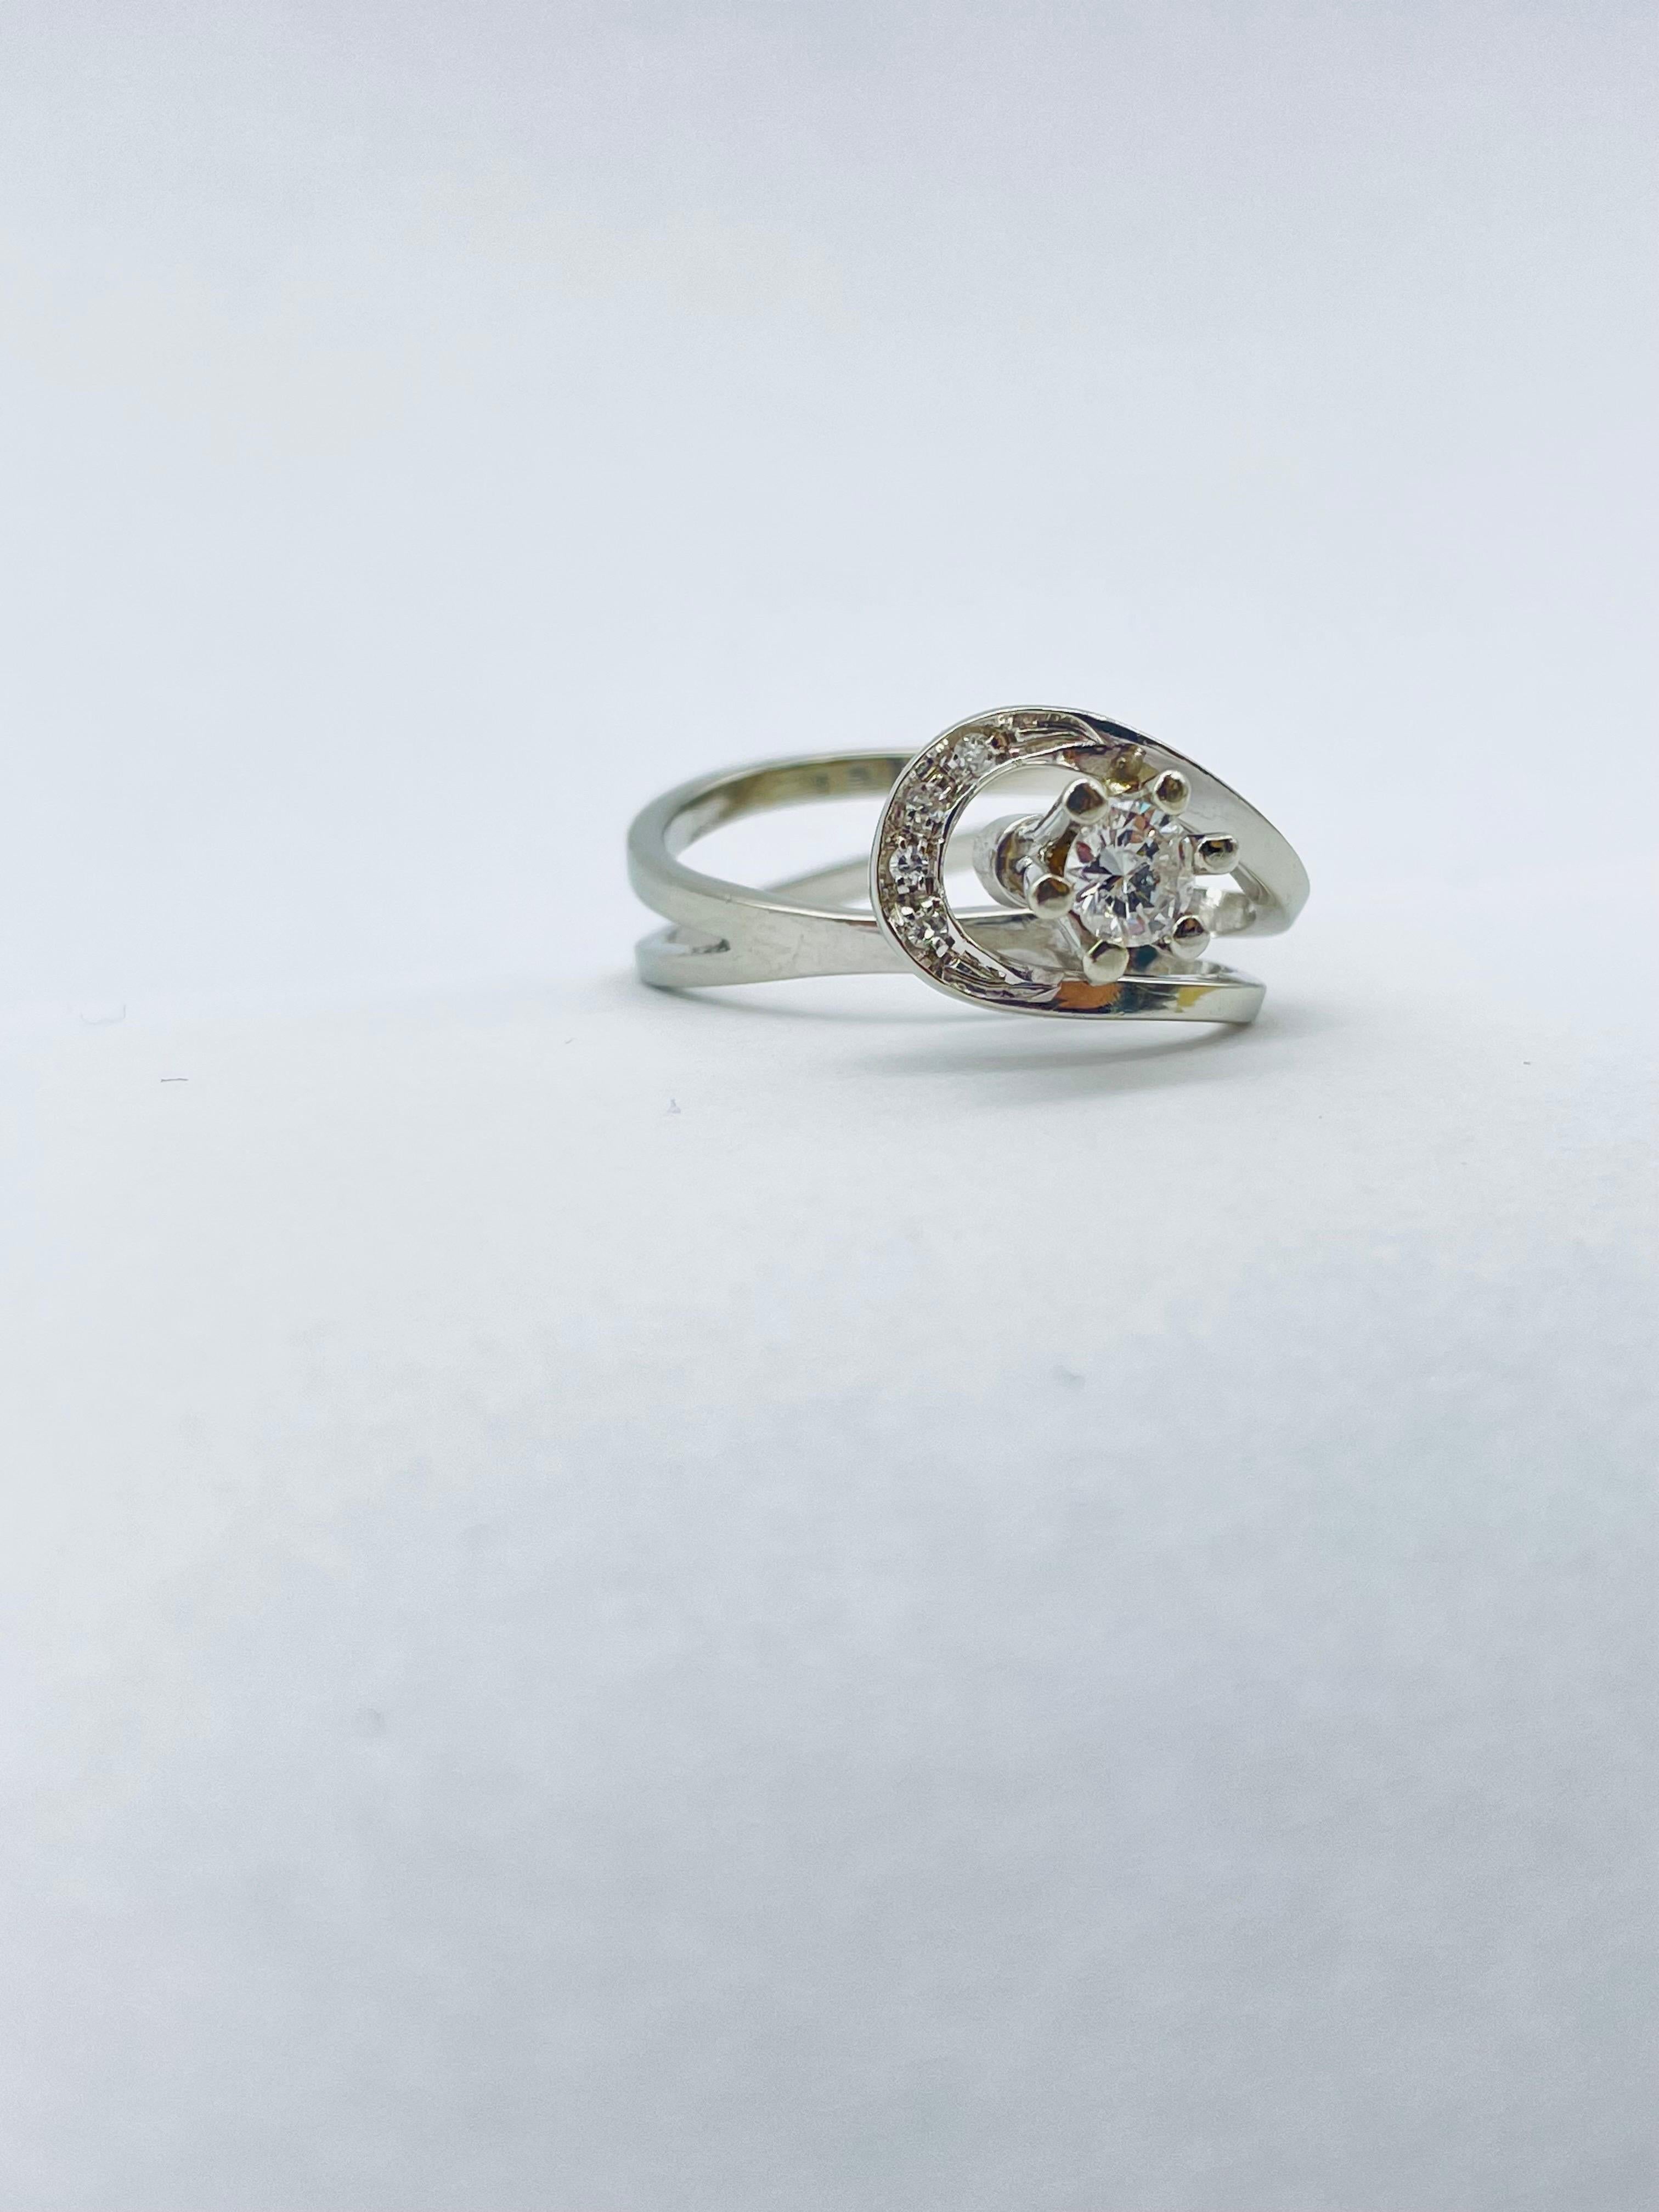 Beautiful 14k White Gold Solitaire Ring with a 0.32 Carat Diamond 8